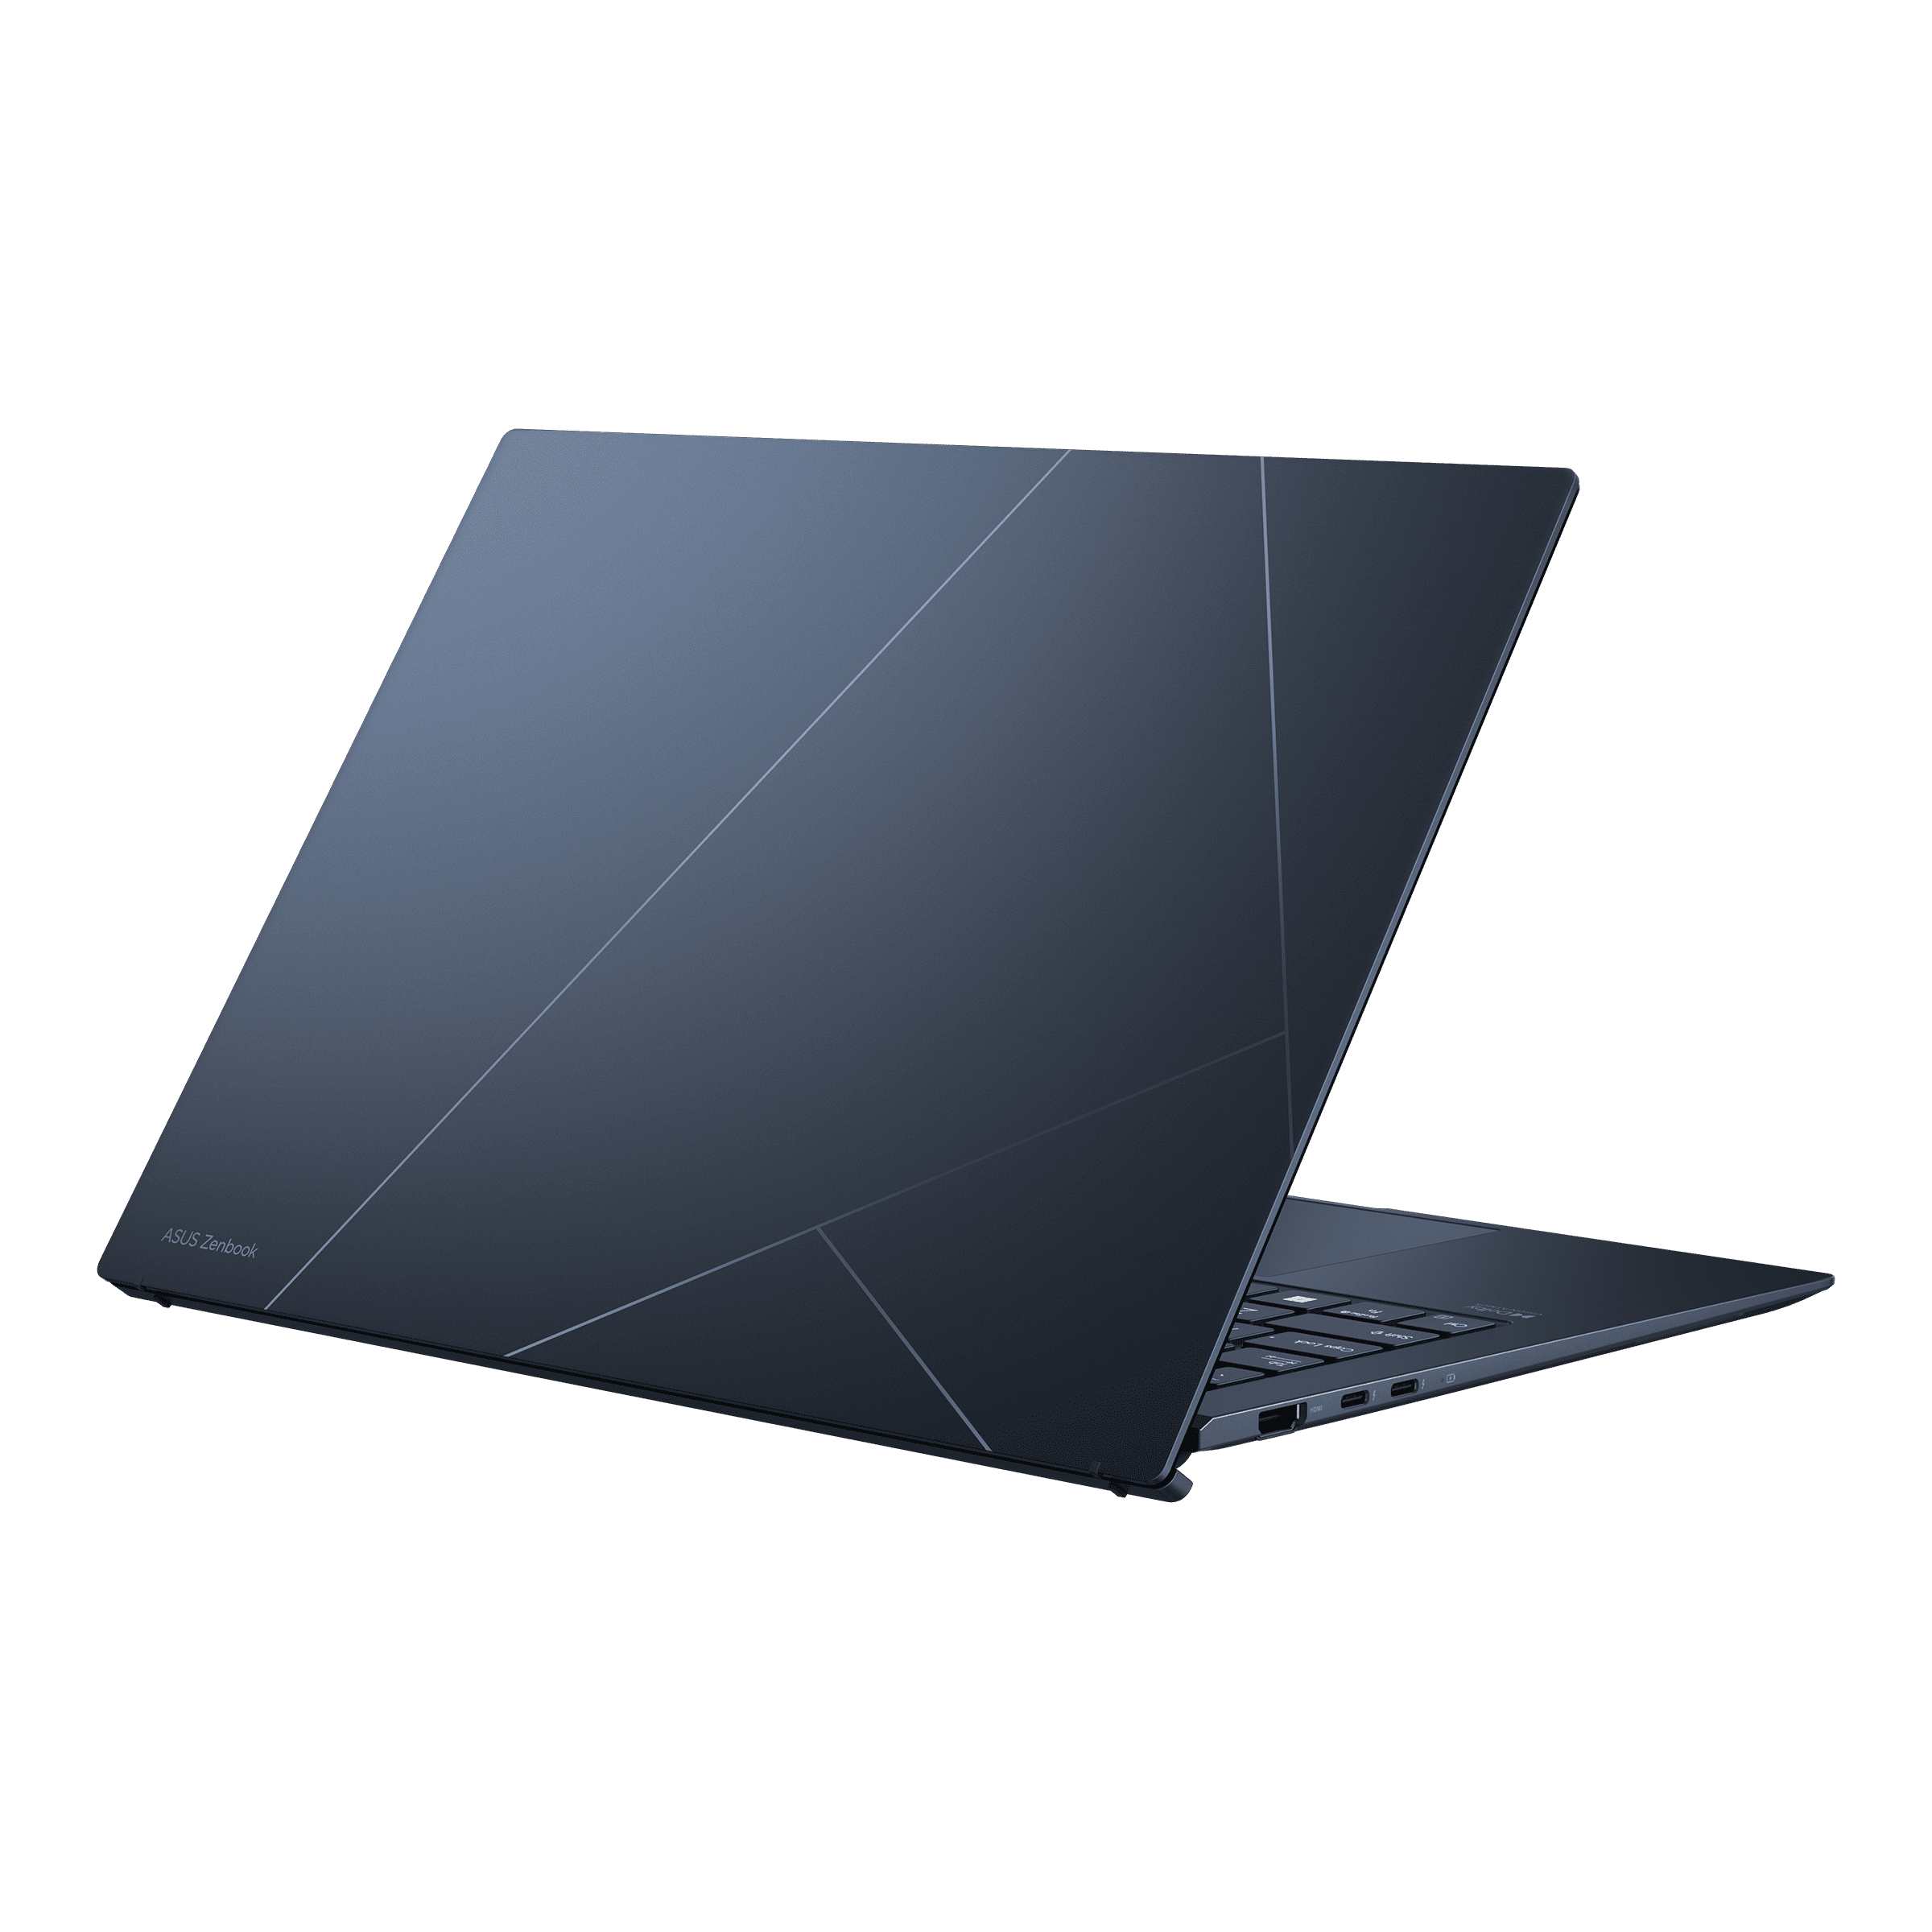 ASUS Zenbook S 13 OLED (UX5304)｜Laptops For Home｜ASUS Global